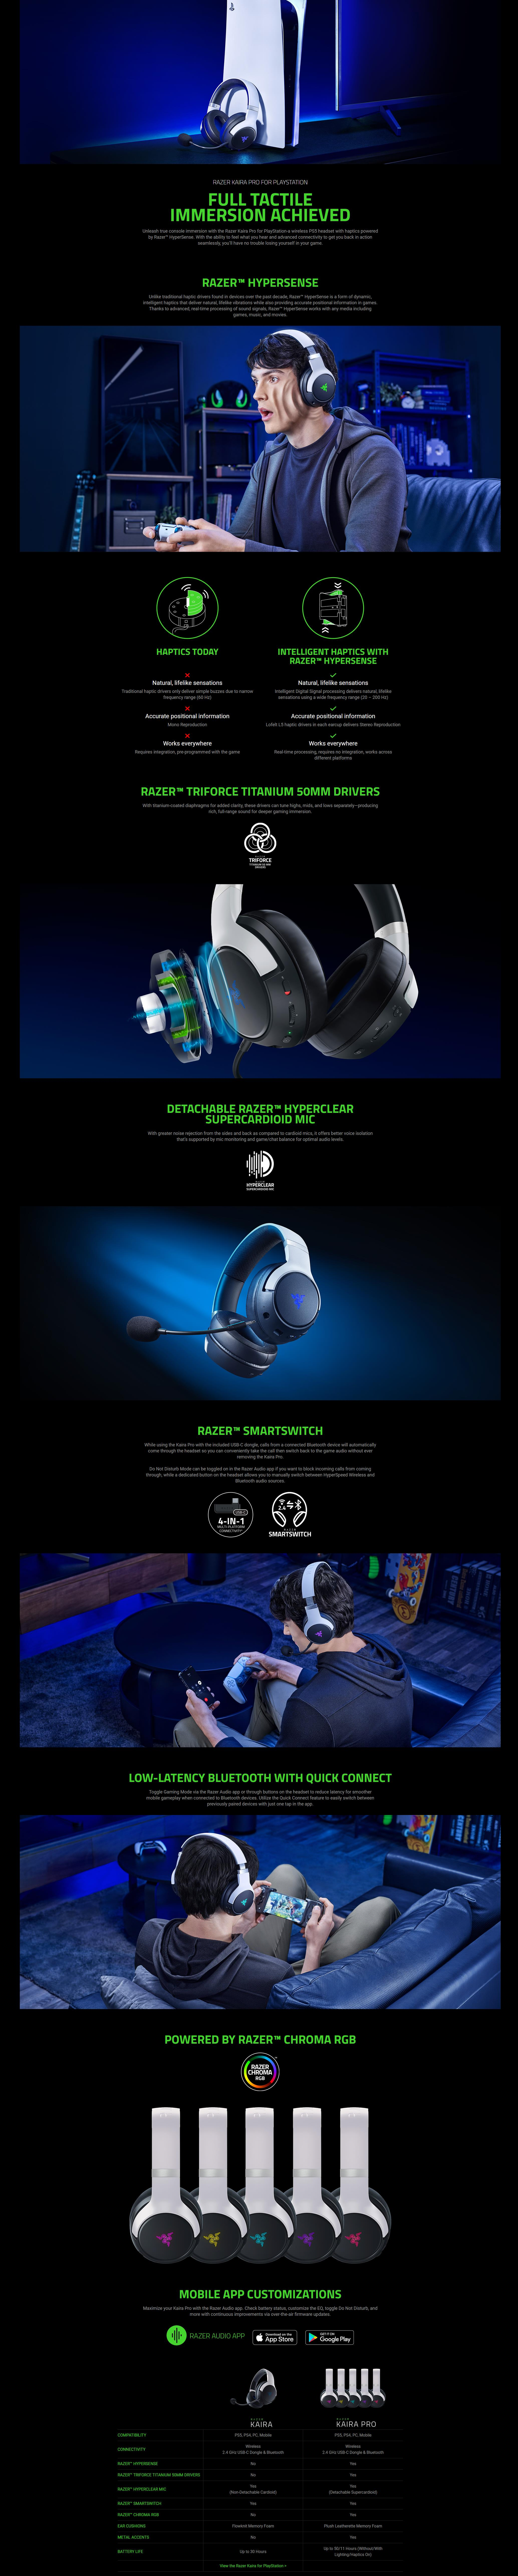 A large marketing image providing additional information about the product Razer Kaira Pro for Playstation - Additional alt info not provided